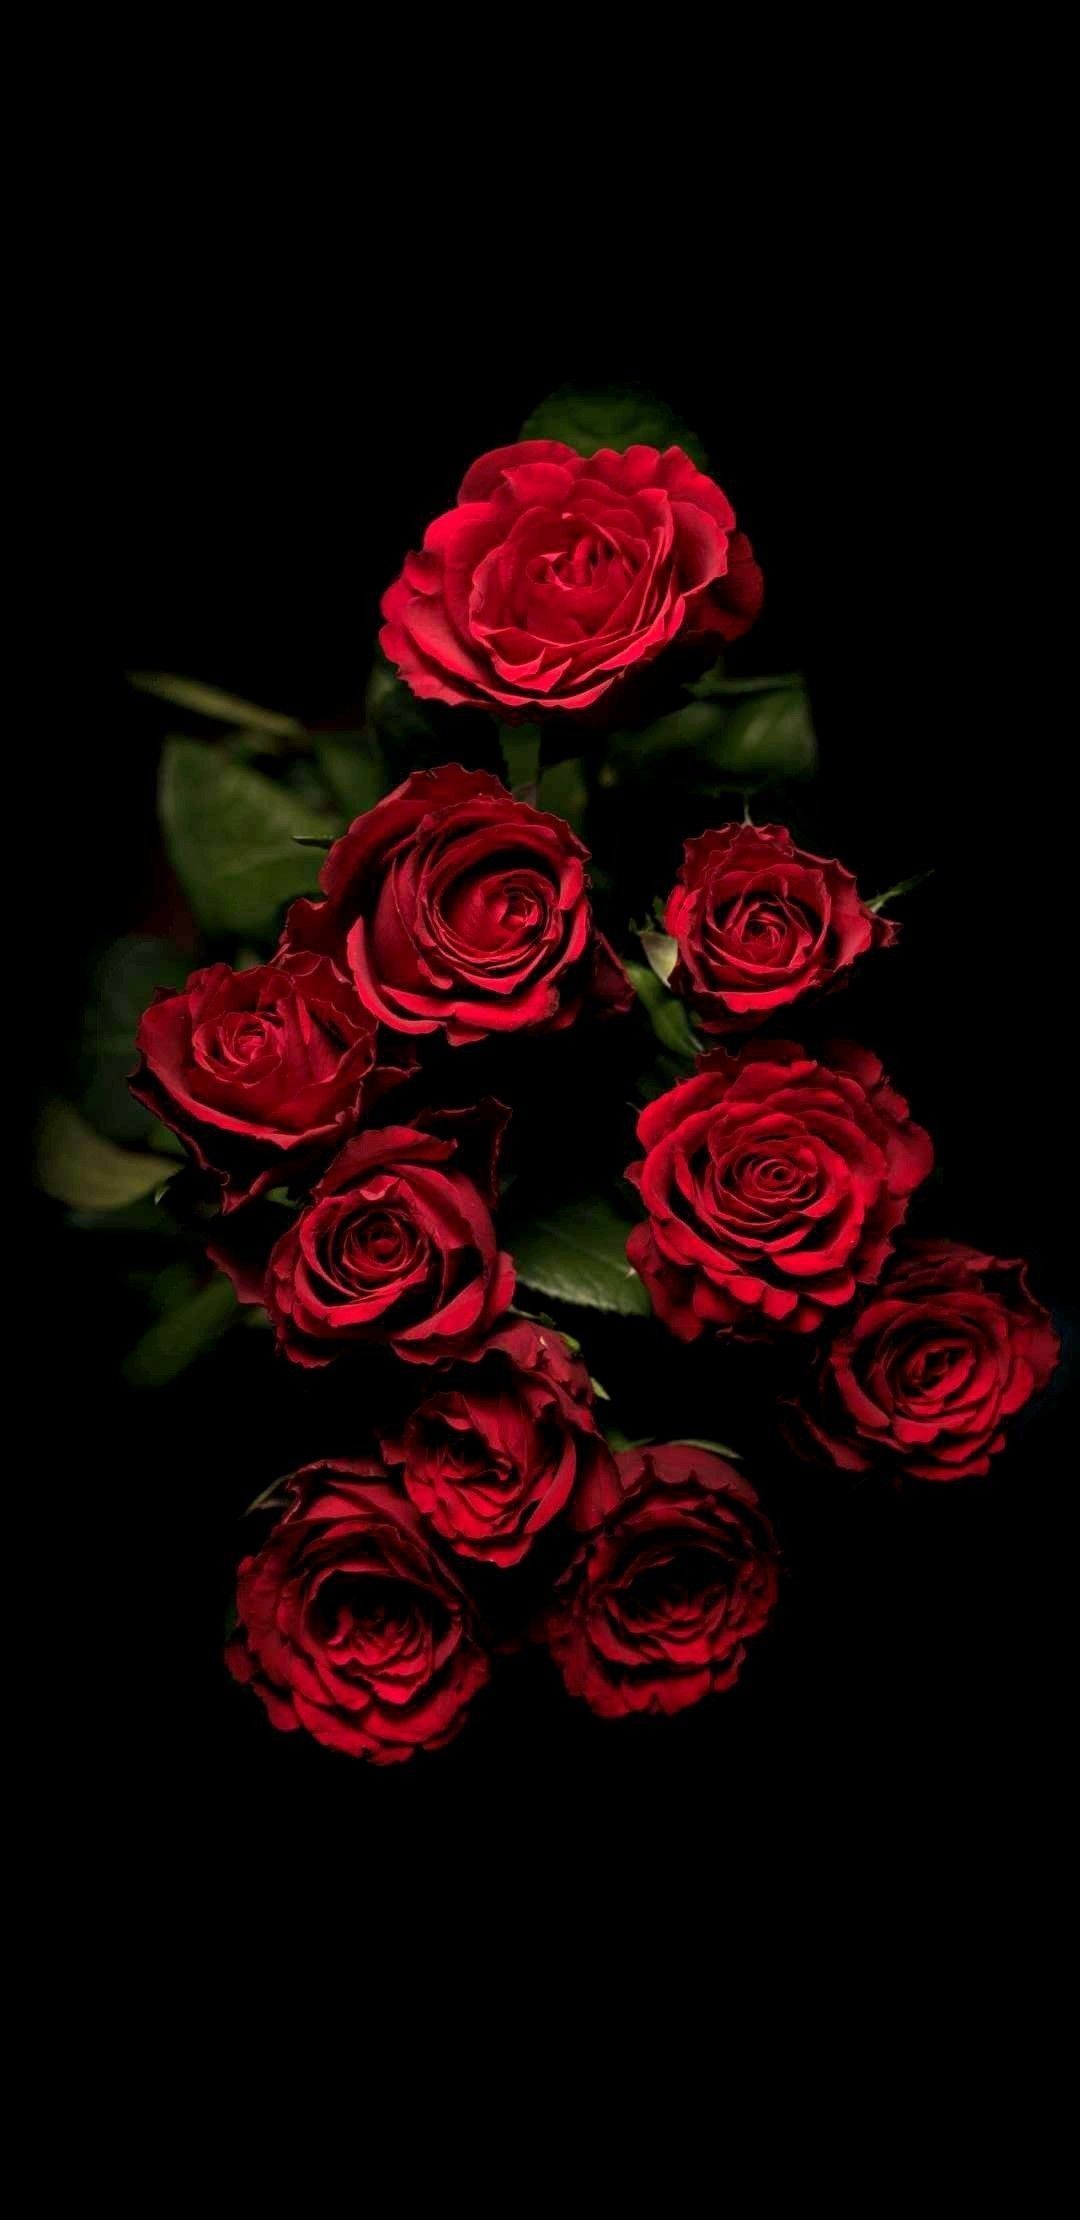 Withering Dark Blood Red Roses Autumn Stock Photo 1531495463  Shutterstock